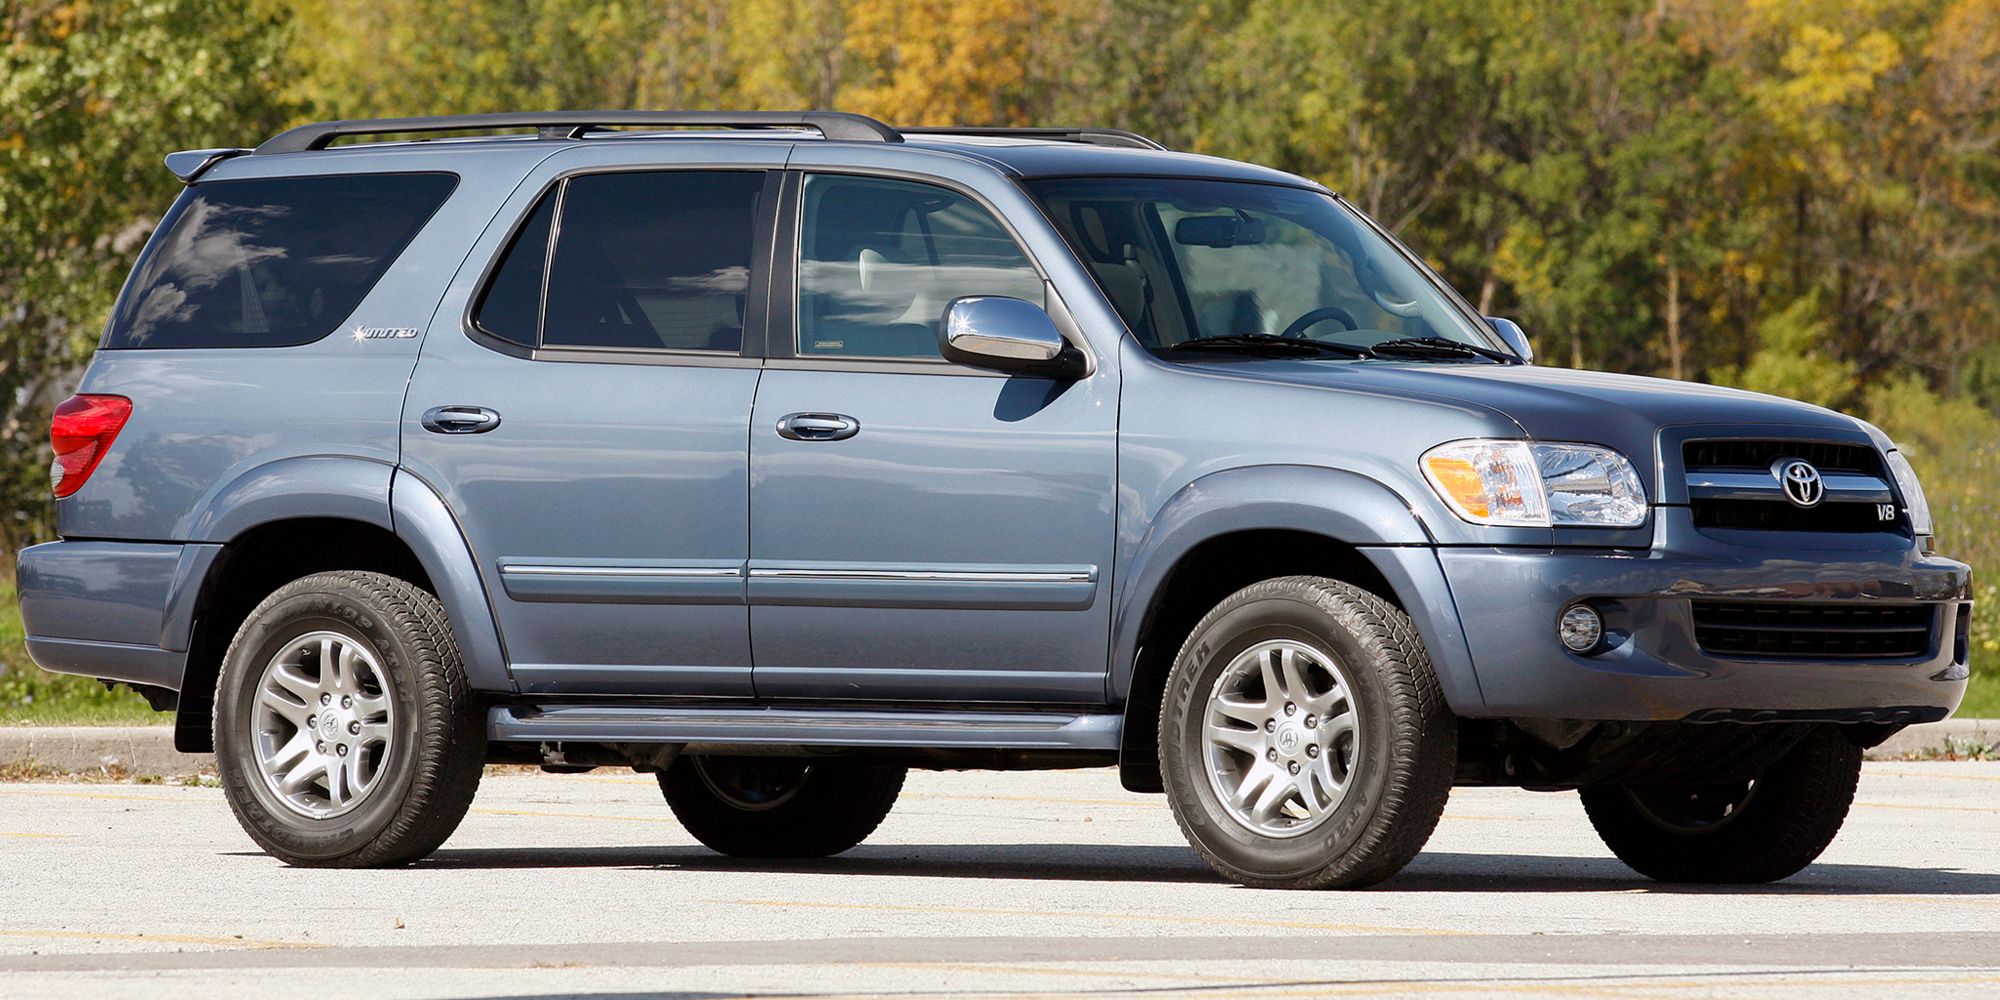 Front 3/4 view of the first generation Sequoia in blue